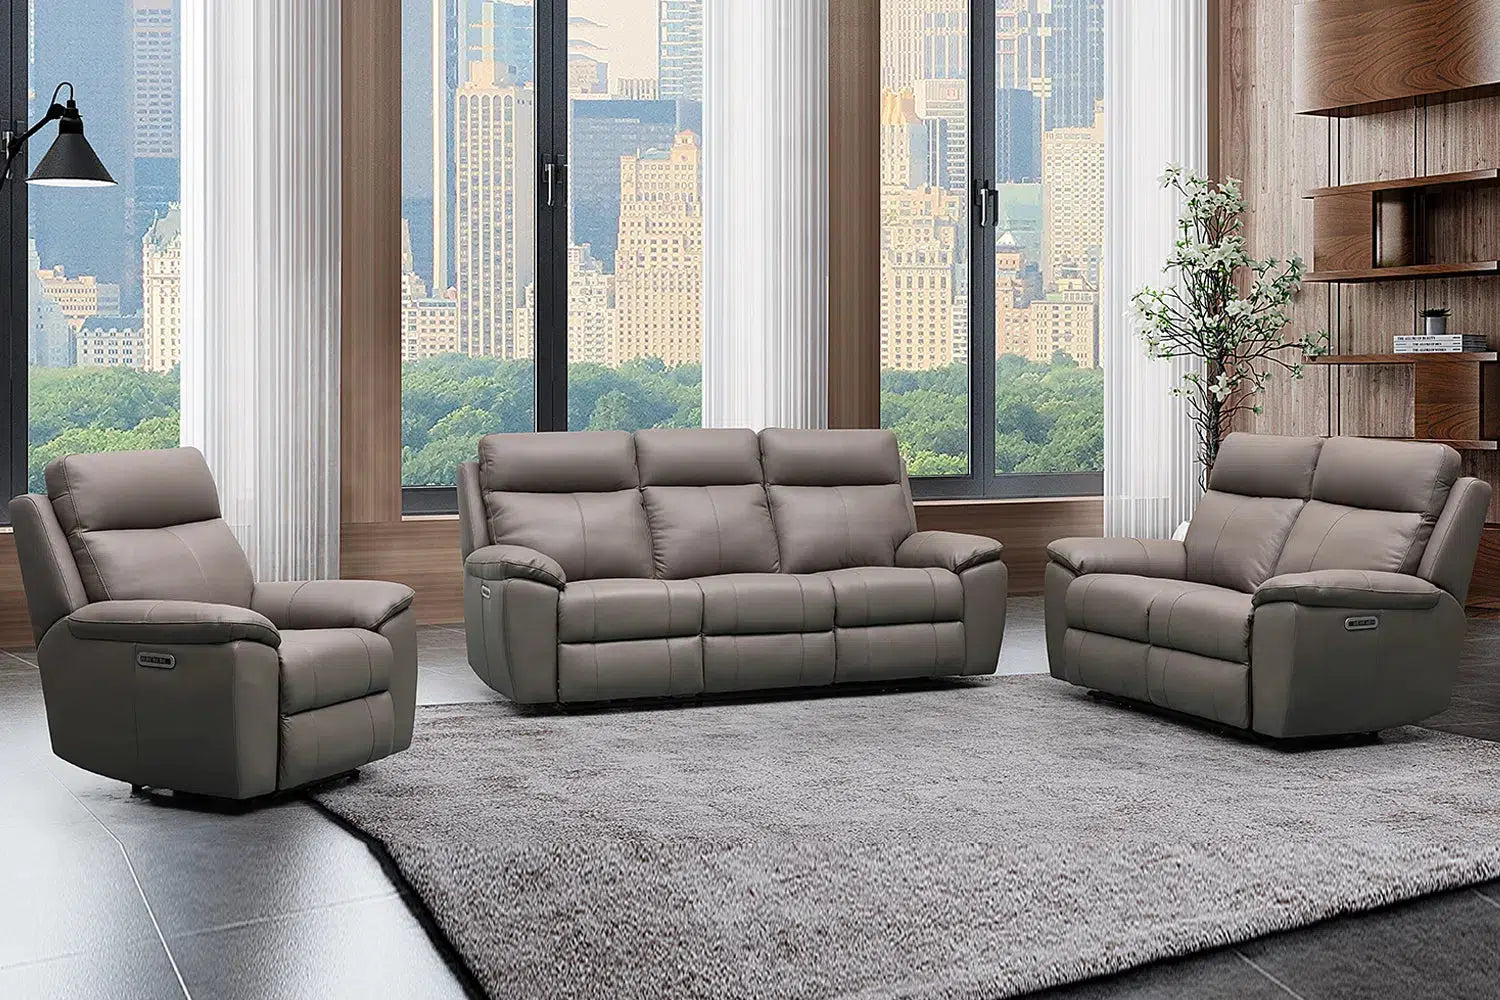 Paterson Full Leather Recliner Suite-Adore Home Living